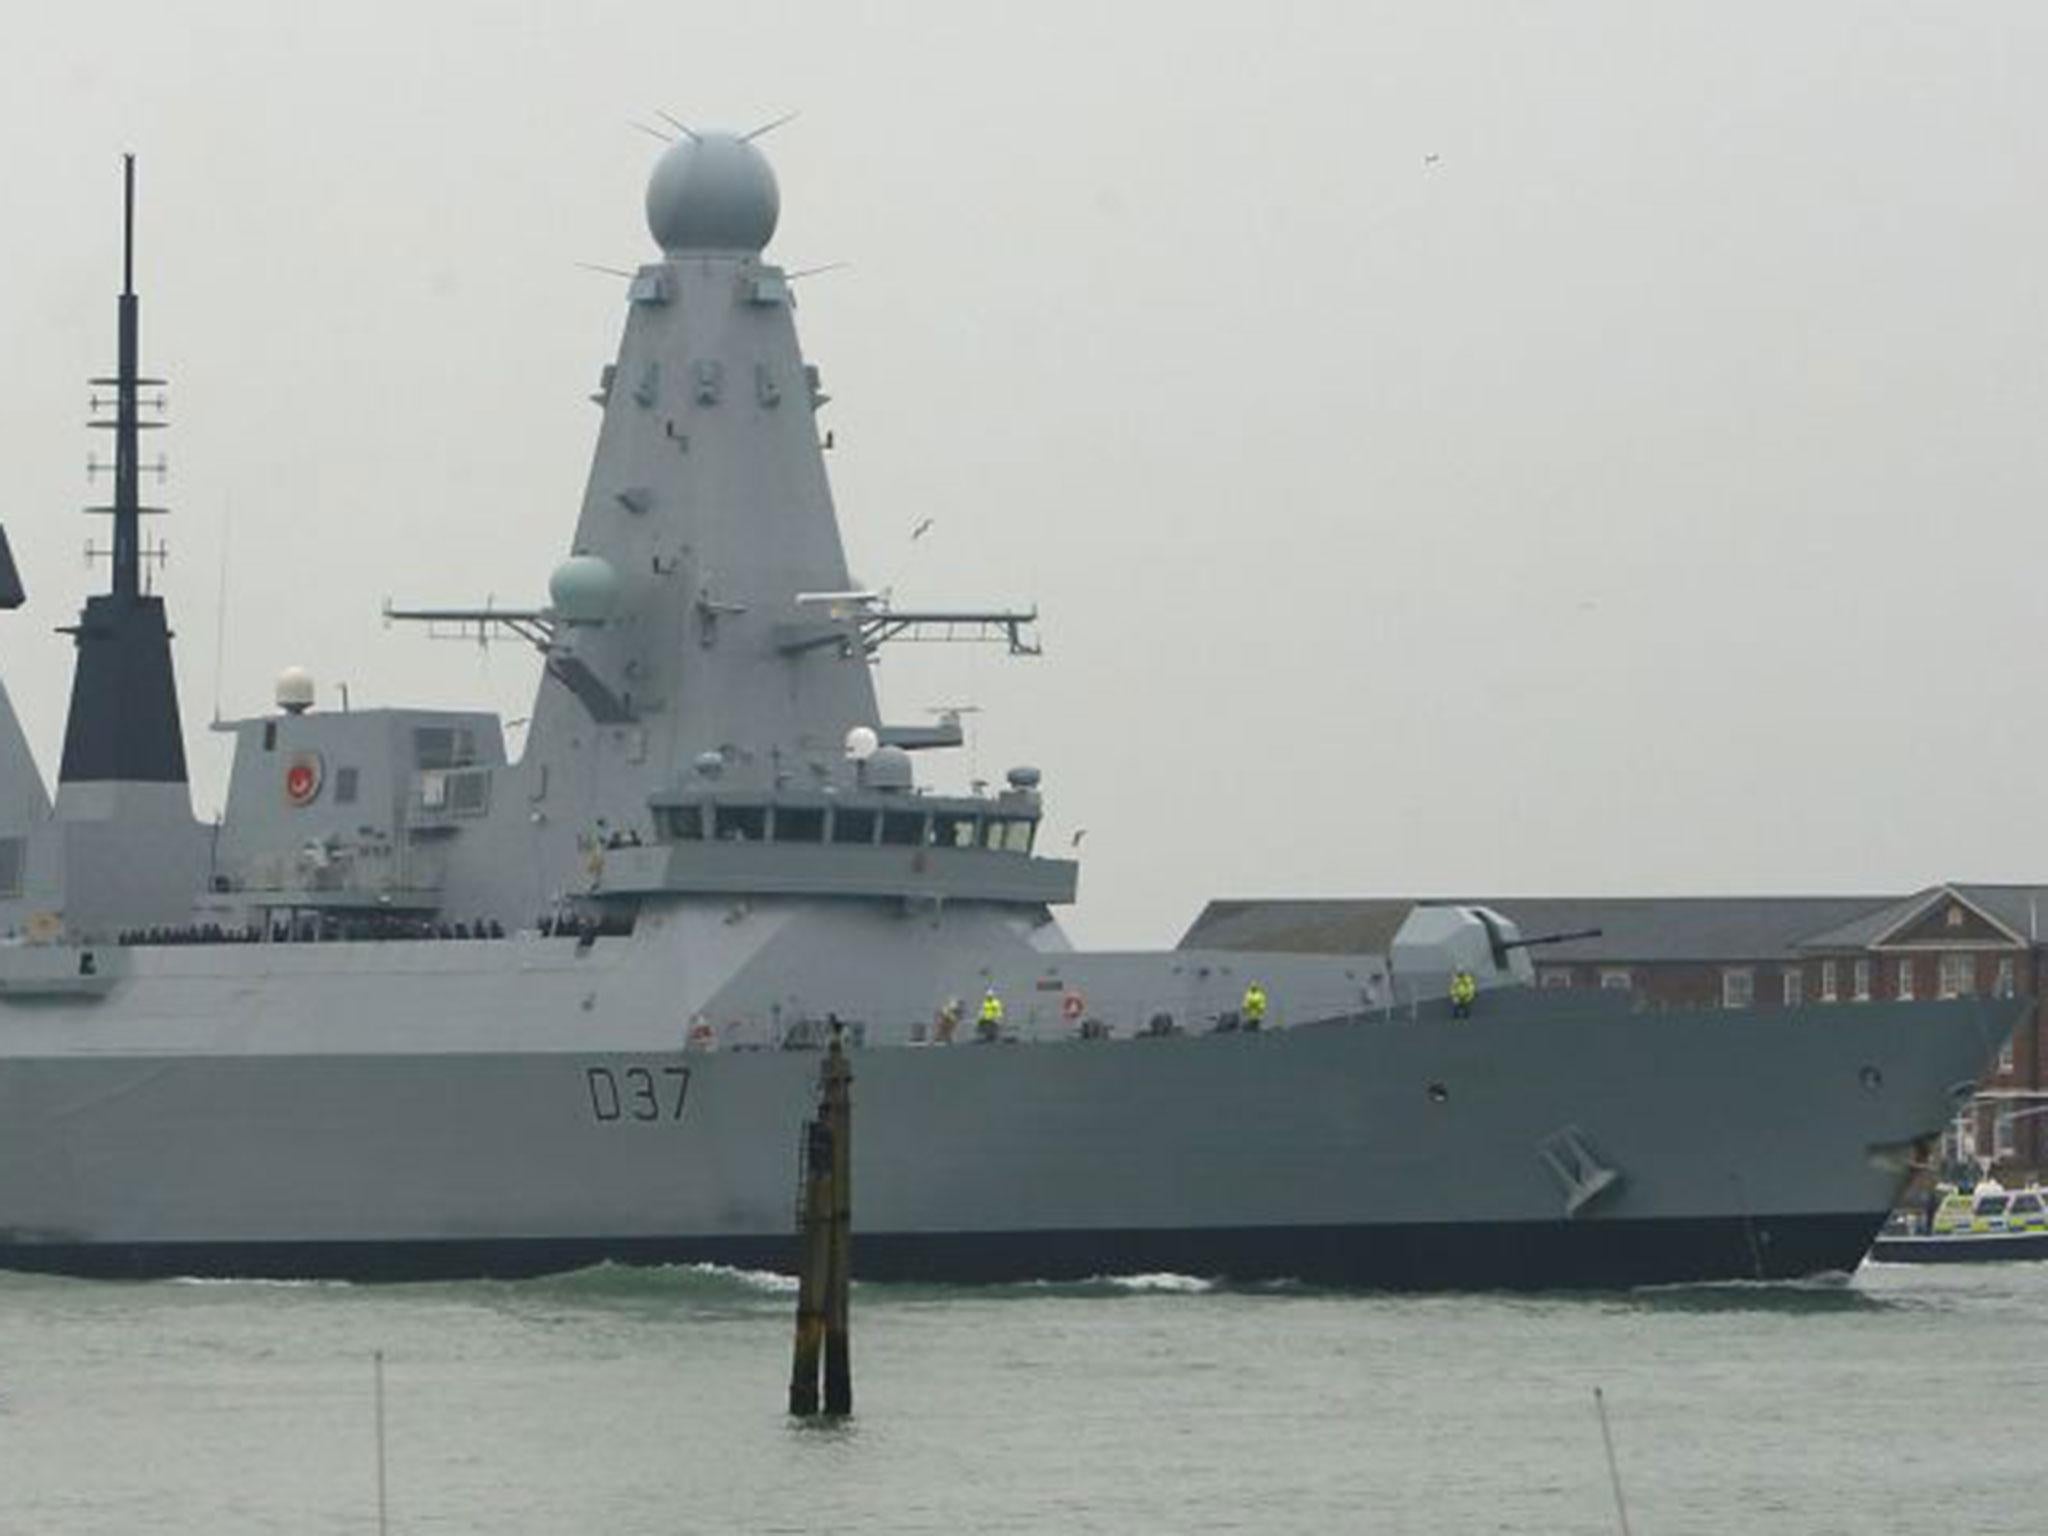 File photo of HMS Duncan, which had to be towed back to shore after it experienced 'technical difficulties'